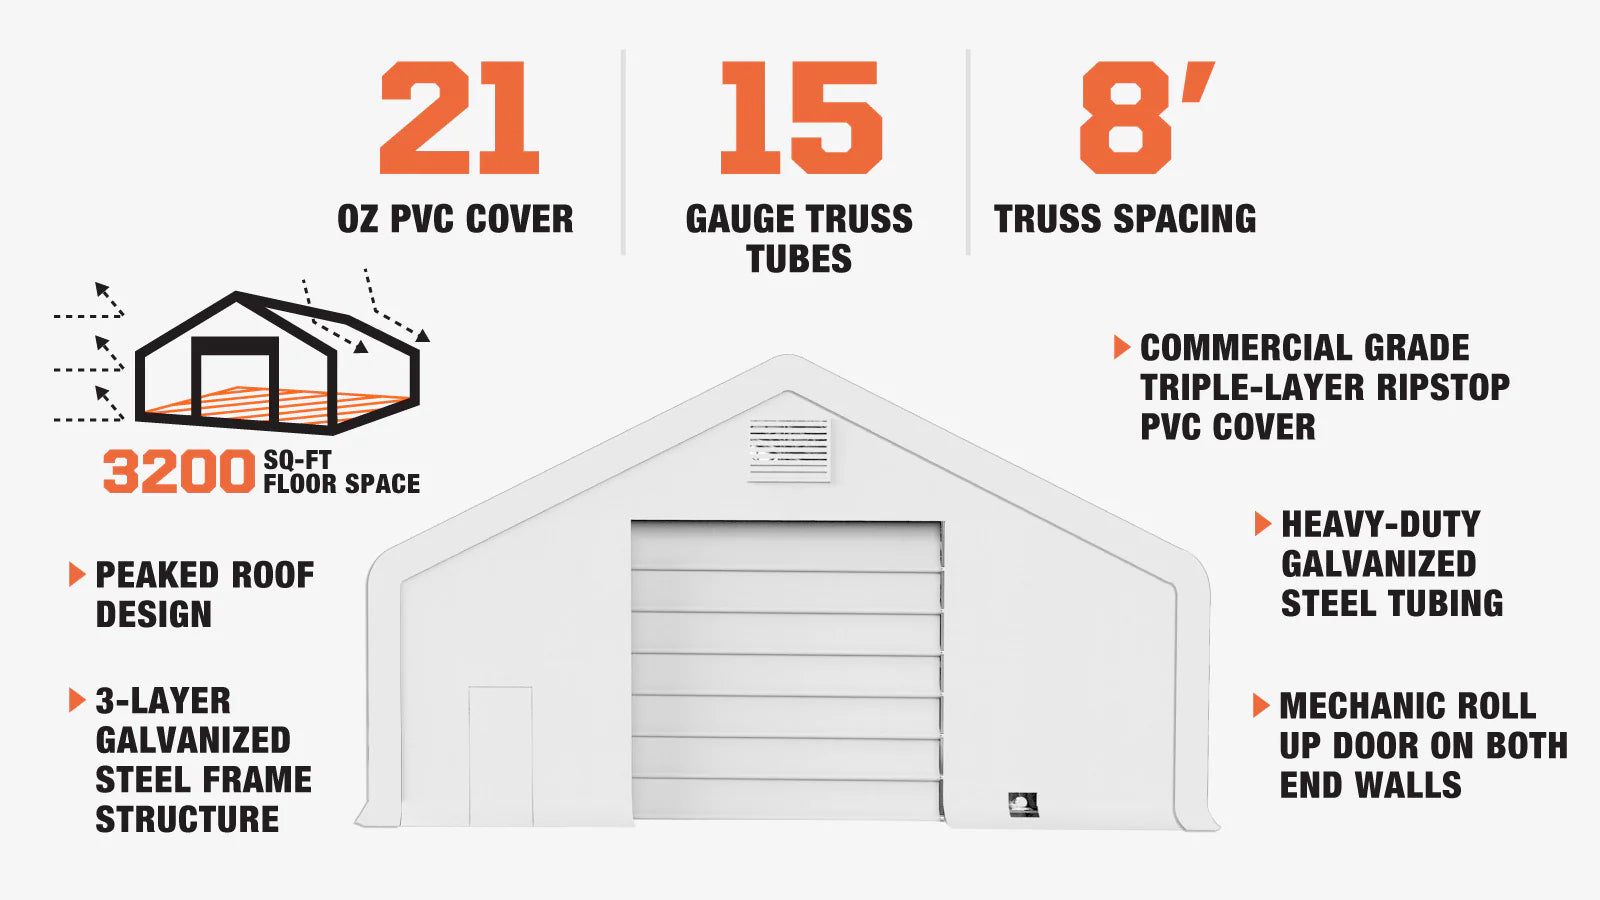 TMG Industrial Pro Series 40' x 80' Dual Truss Storage Shelter with Heavy Duty 21 oz PVC Cover & Drive Through Doors, TMG-DT4081-PRO(Previously TMG-DT4080-PRO)-description-image